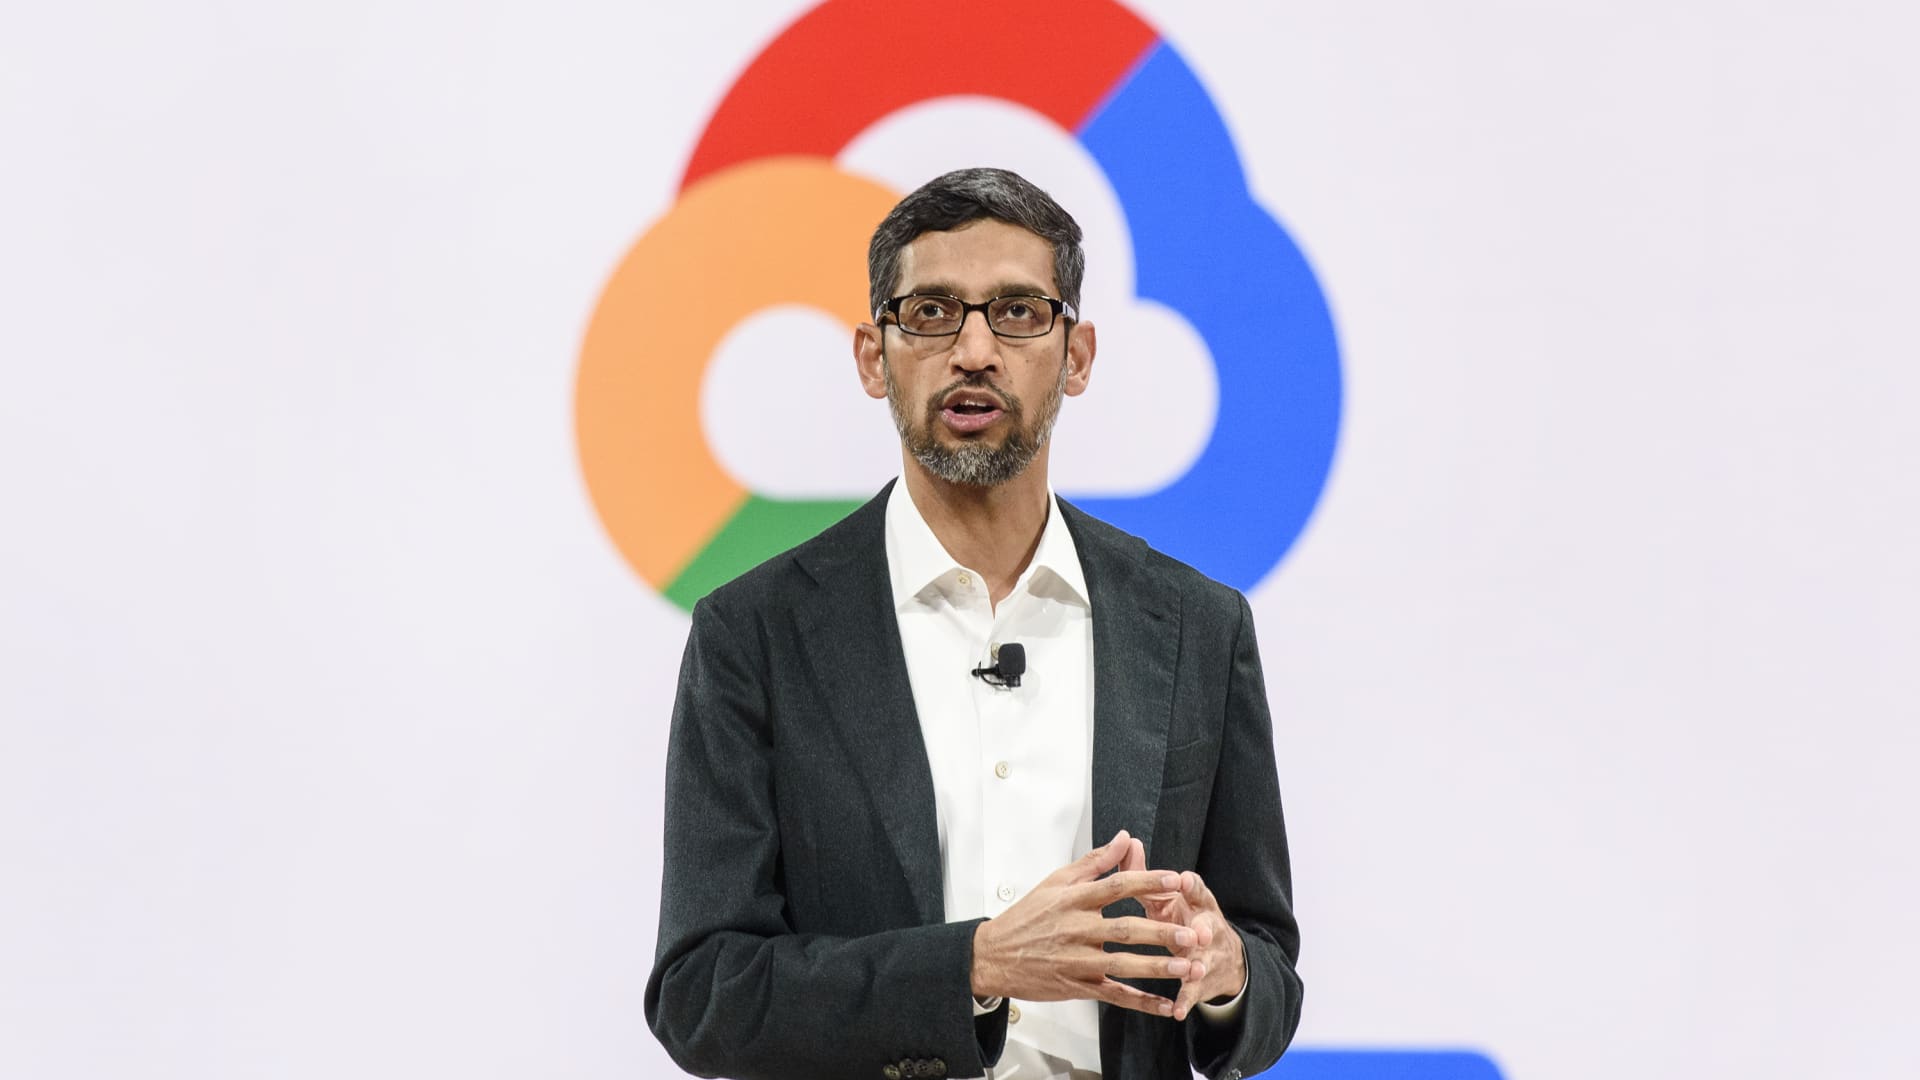 Sundar Pichai, chief executive officer at Google LLC, speaks during the Google Cloud Next '19 event in San Francisco, California, U.S., on Tuesday, April 9, 2019.